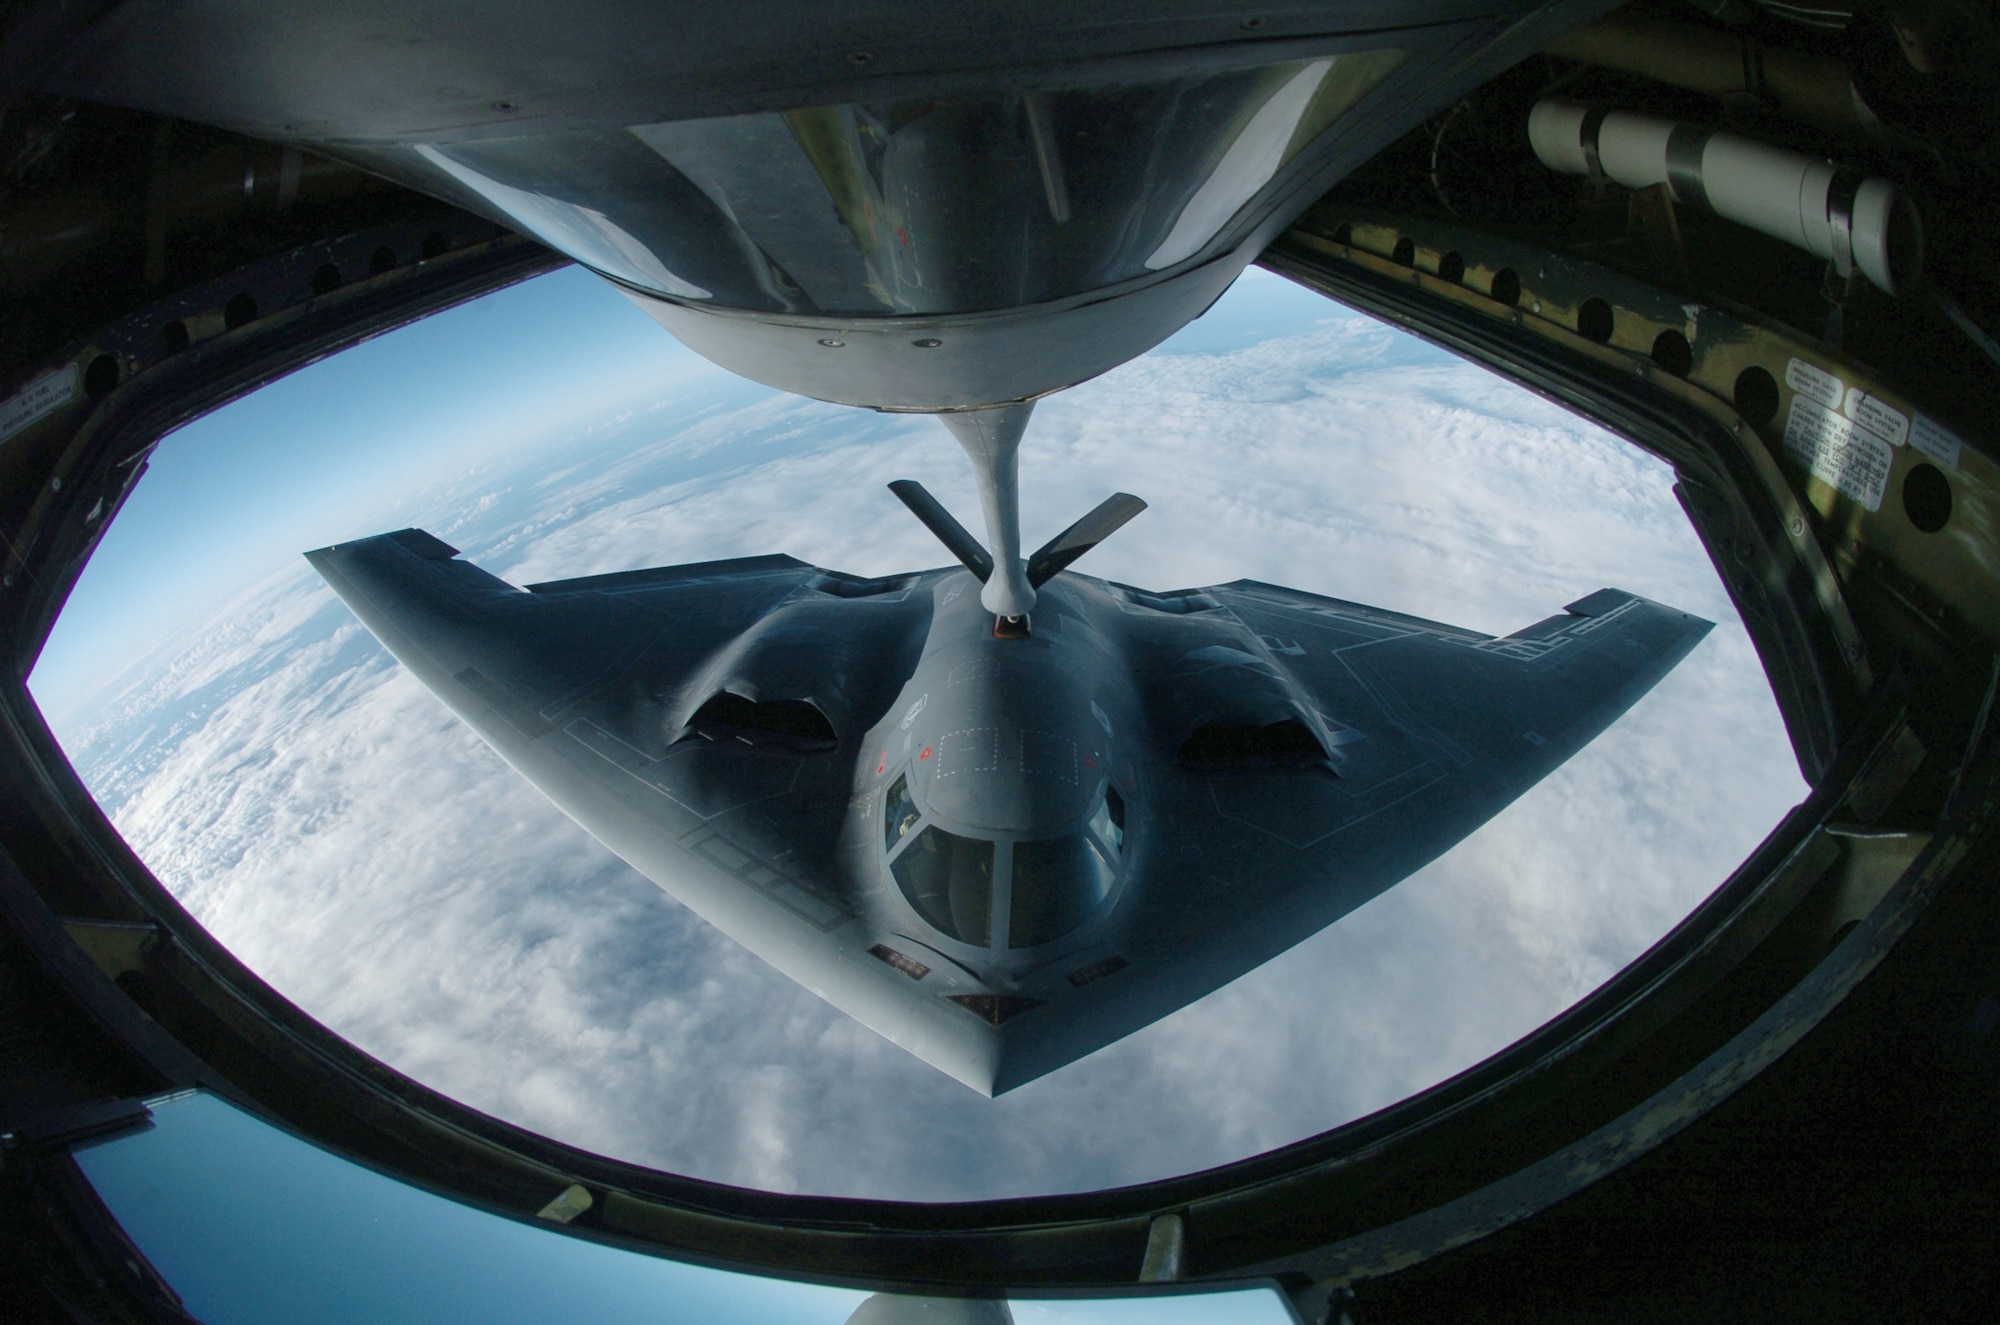 OVER THE PACIFIC OCEAN -- A B-2 Spirit bomber refuels from a KC-135 Stratotanker here during a deployment to Andersen Air Force Base, Guam.  The bomber deployed as part of a rotation that has provided U.S. Pacific Command officials a continuous bomber presence in the Asia-Pacific region, enhancing regional security and the U.S. commitment to the Western Pacific.  The Spirit is from the 509th Bomb Wing at Whiteman AFB, Mo.  The Stratotanker is assigned to the Illinois Air National Guard's 126th Air Refueling Wing at Scott AFB.  (U.S. Air Force photo by Master Sgt. Val Gempis)